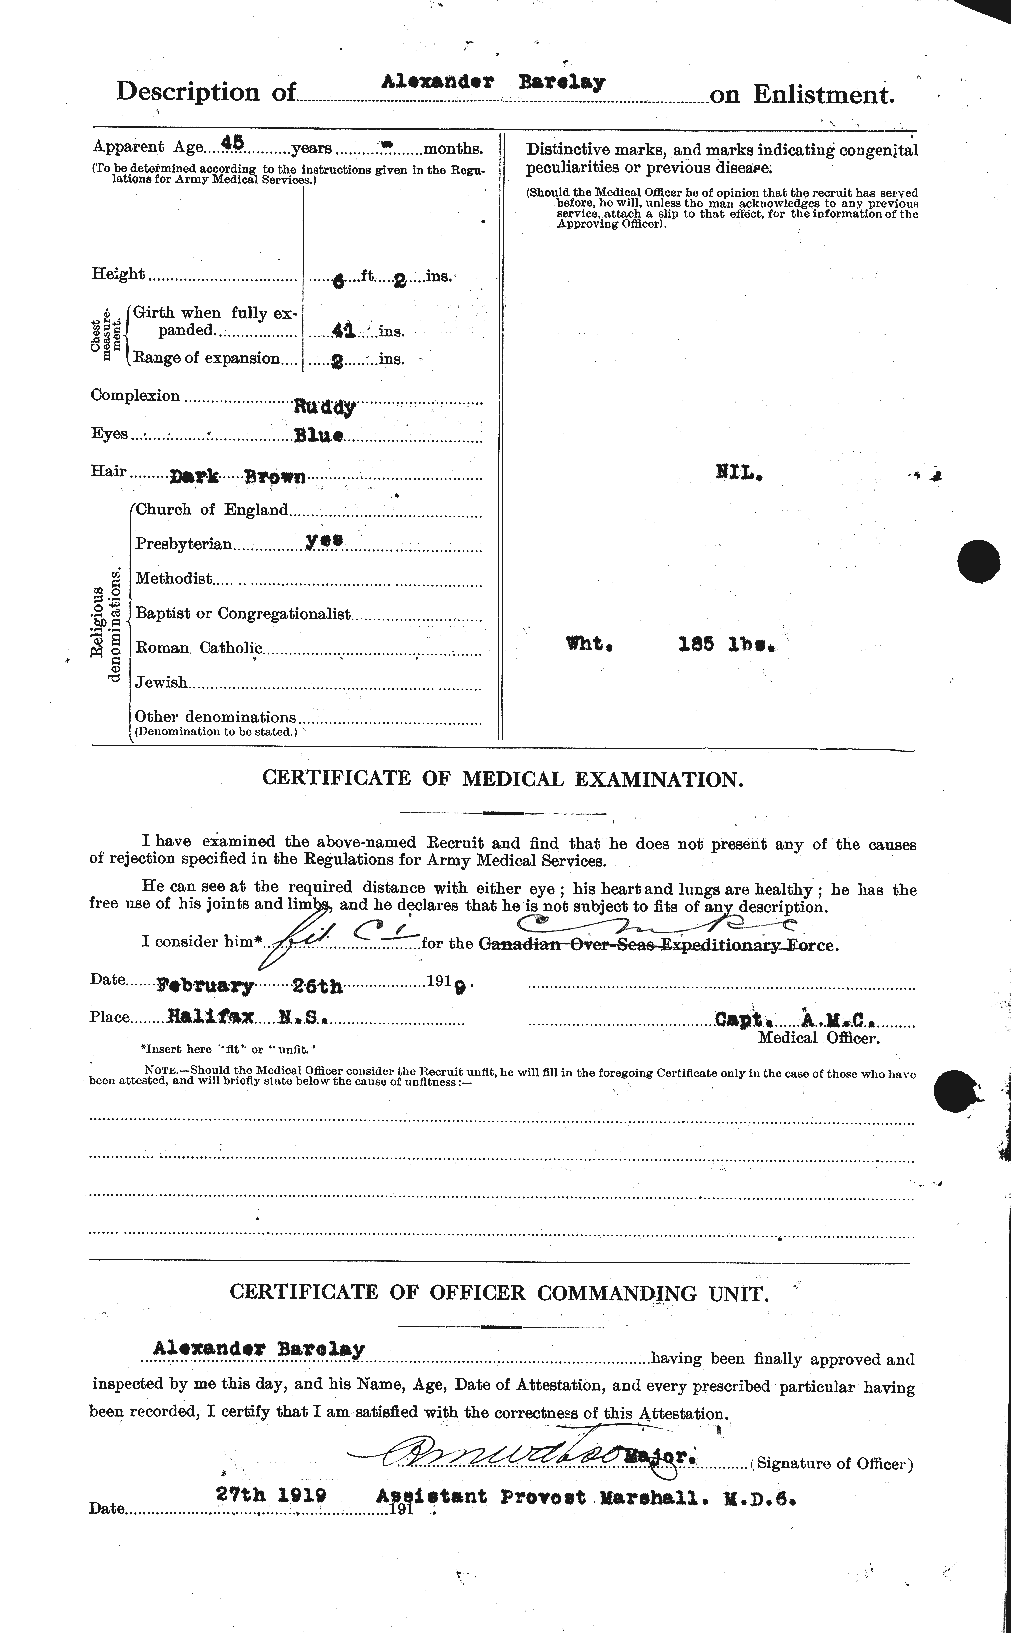 Personnel Records of the First World War - CEF 220970b